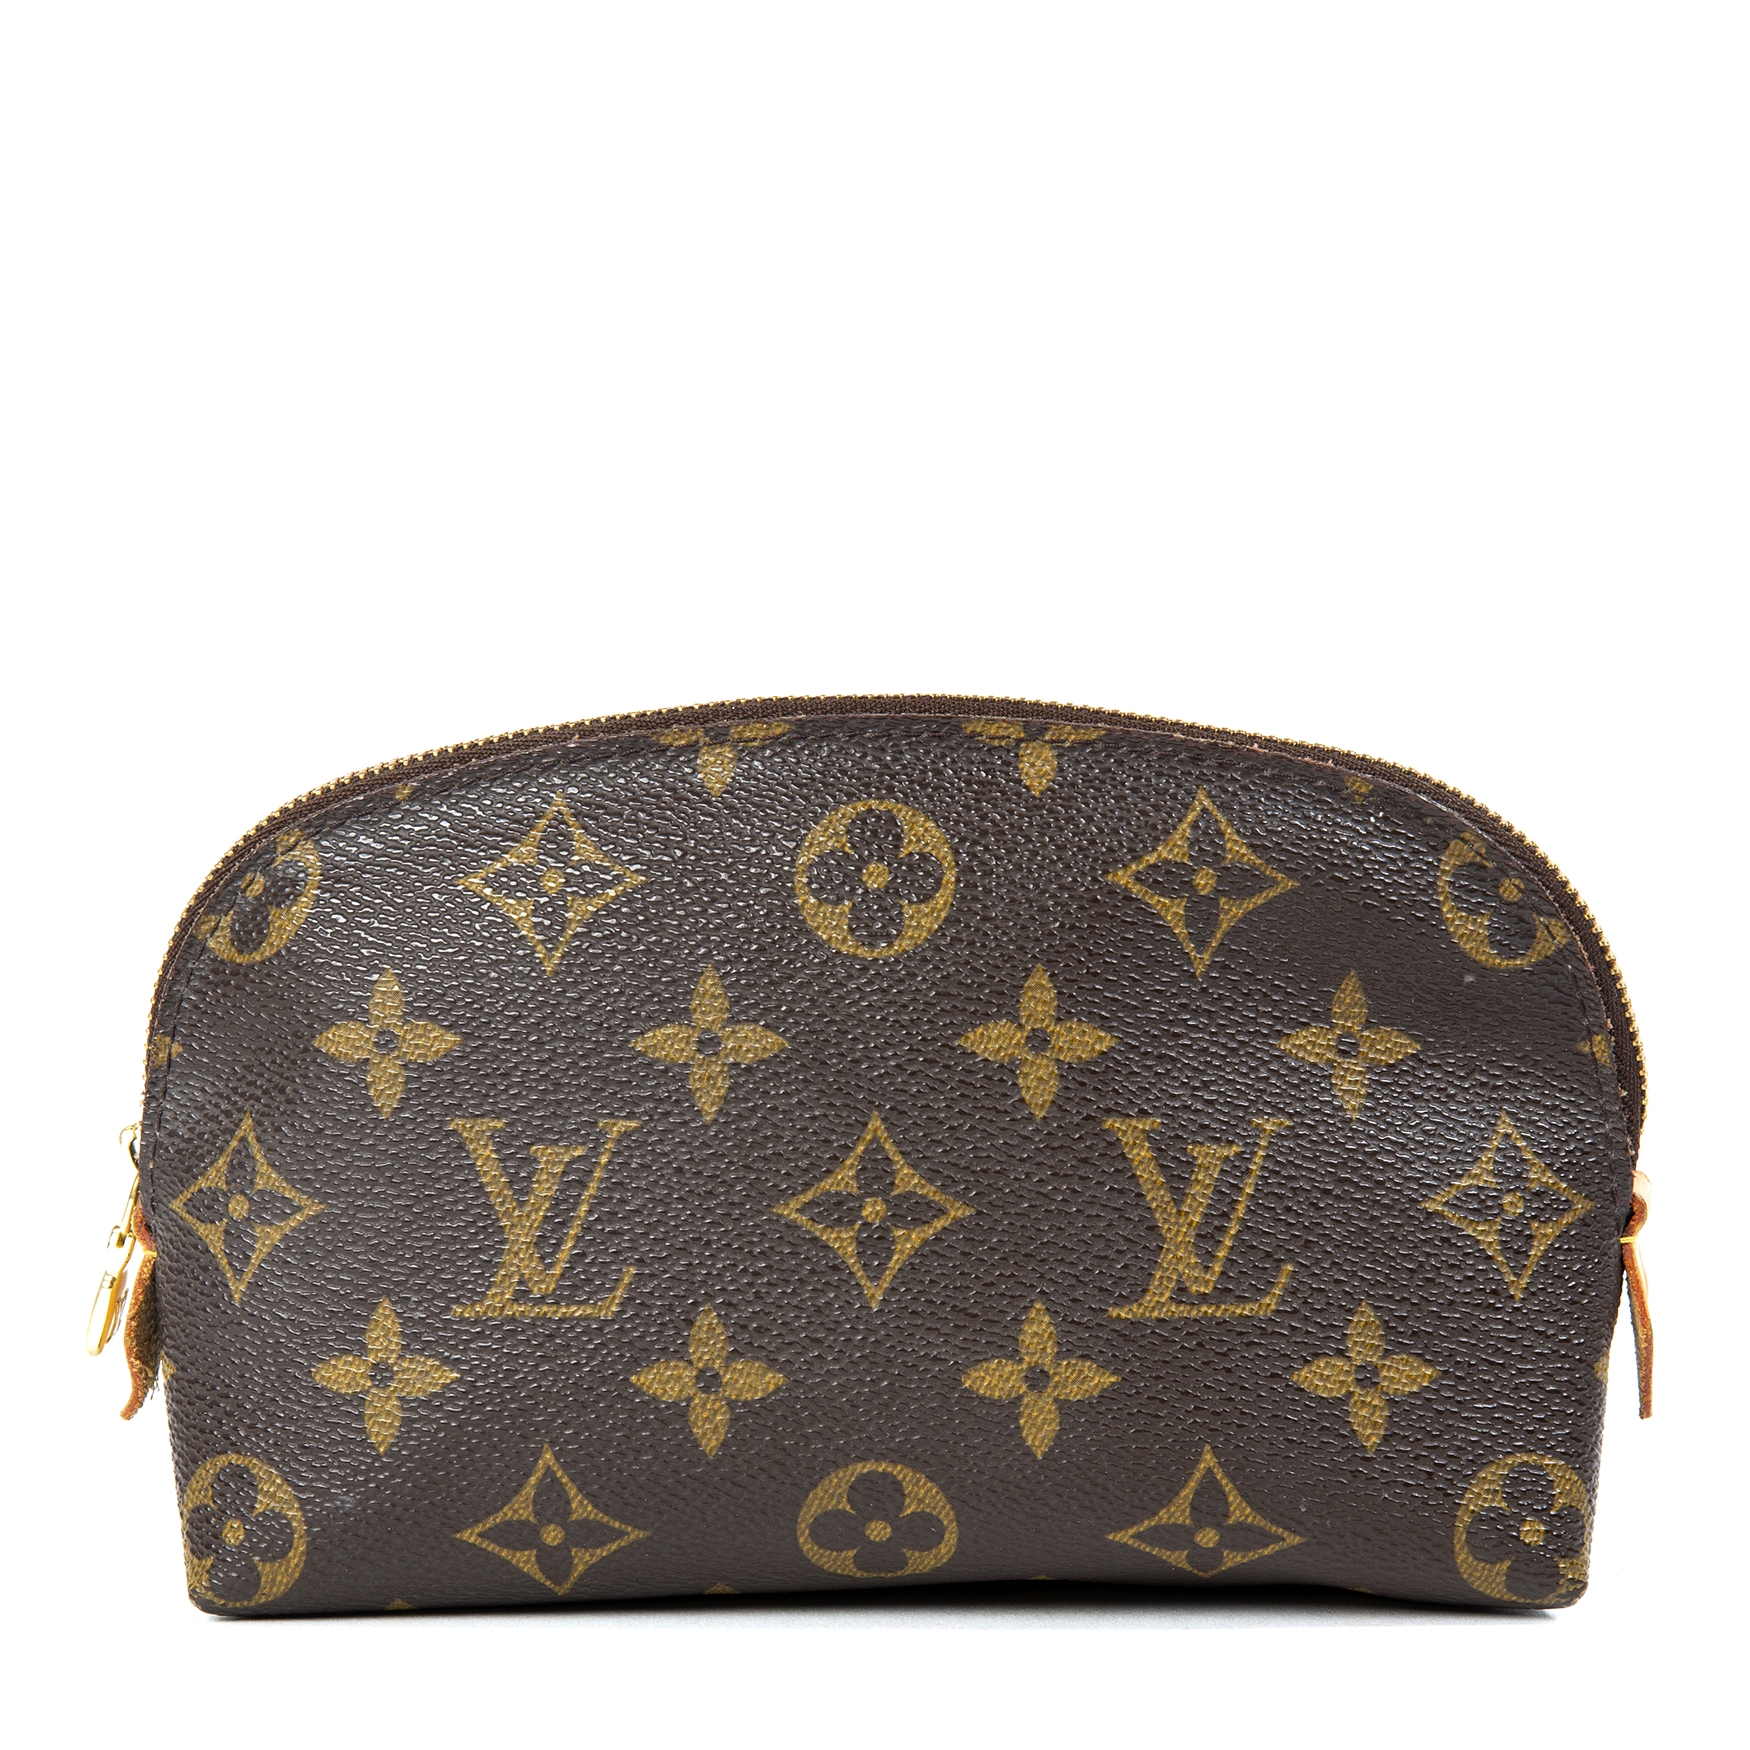 How to Convert Louis Vuitton Cosmetic Pouch into a Crossbody Bag